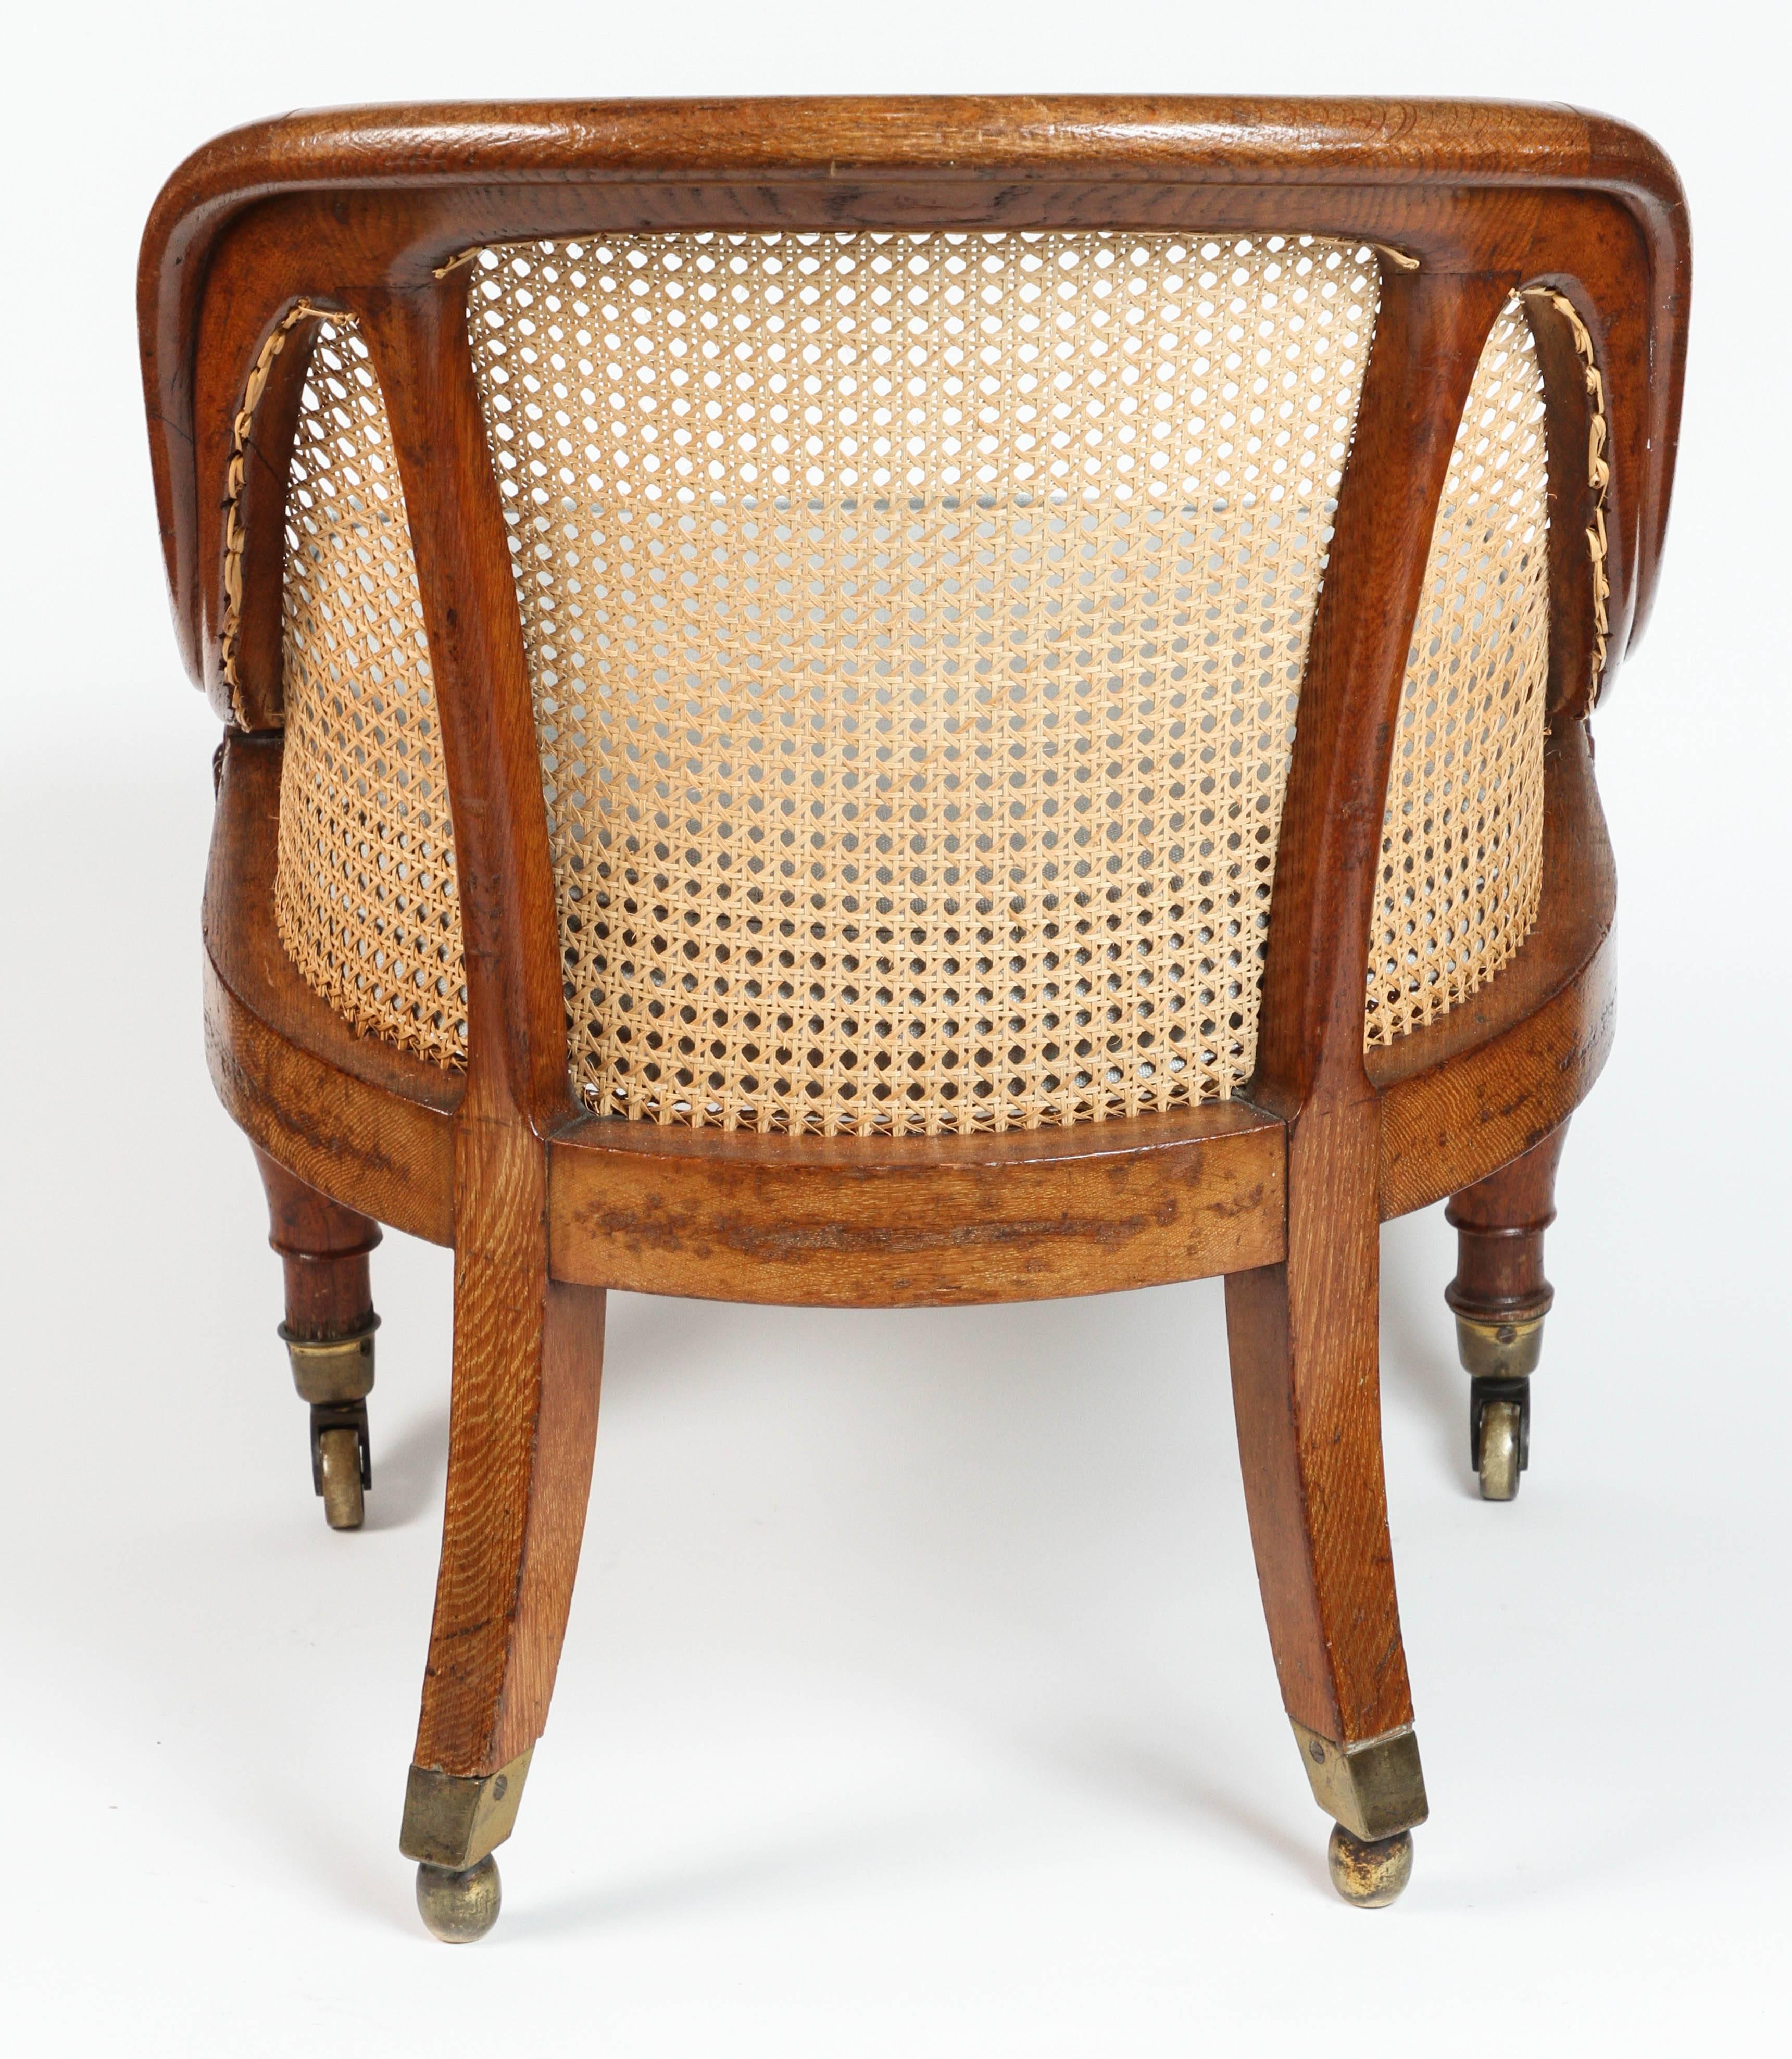 19th Century Pair of English Caned Spoon-Back Chairs For Sale 2